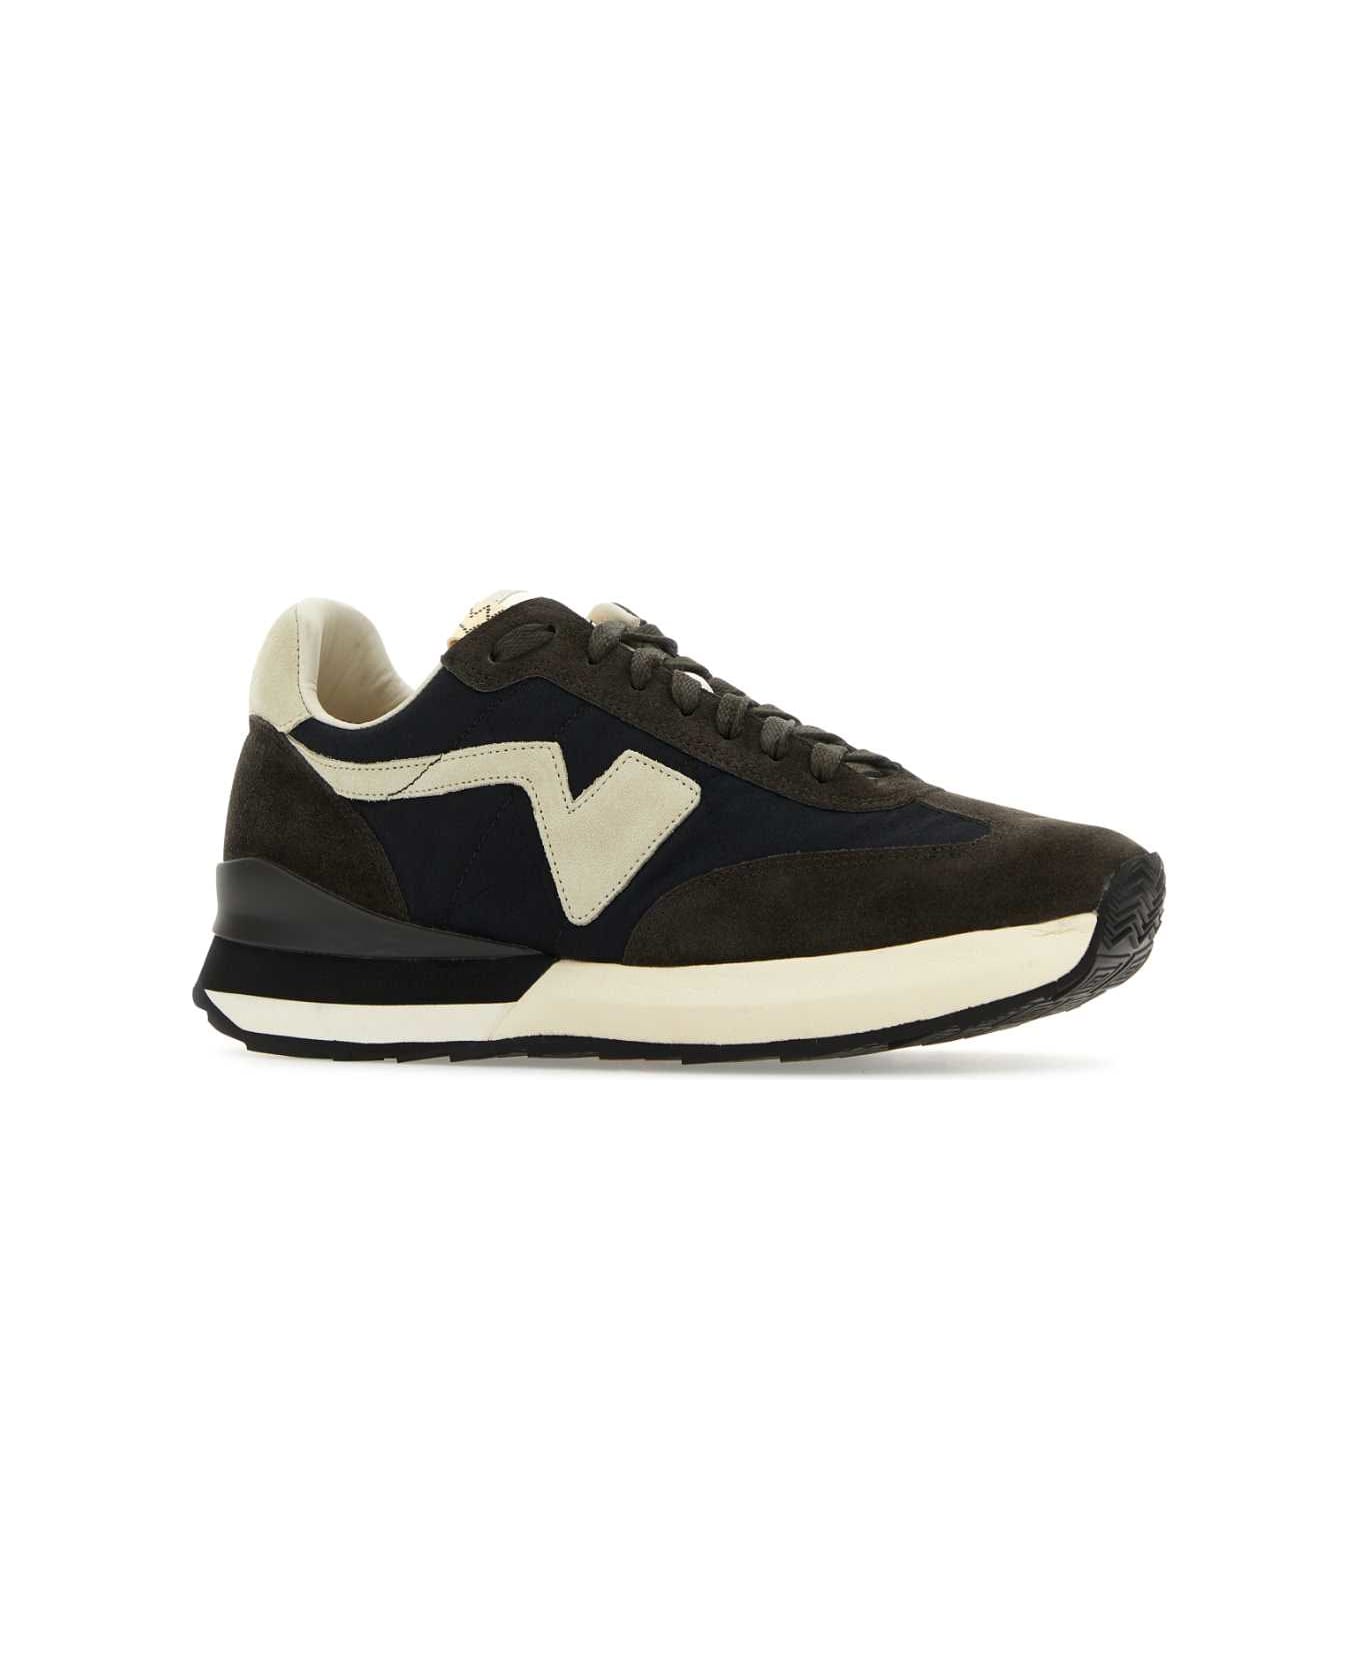 Visvim Multicolor Fabric And Suede Dunand Trainer Sneakers - BLACK スニーカー